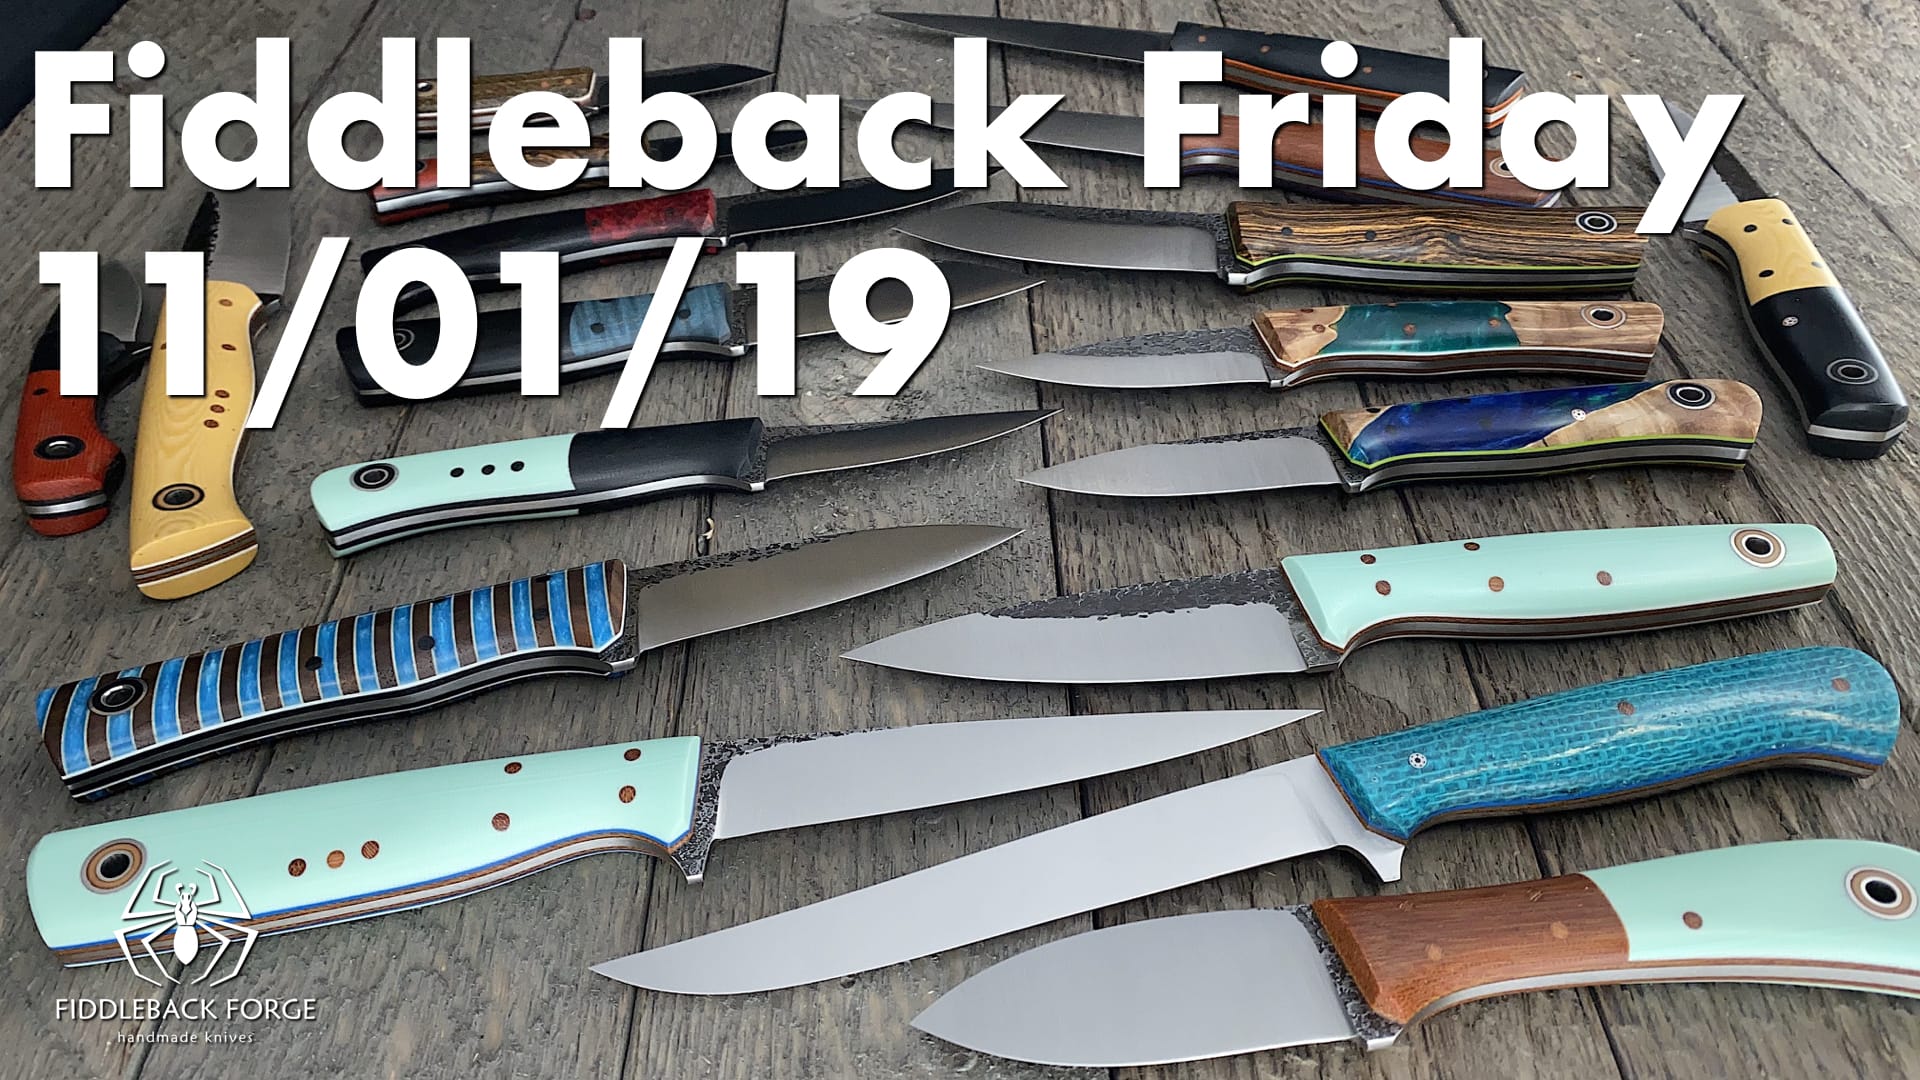 Fiddleback Friday 11/1/19 - Video Preview